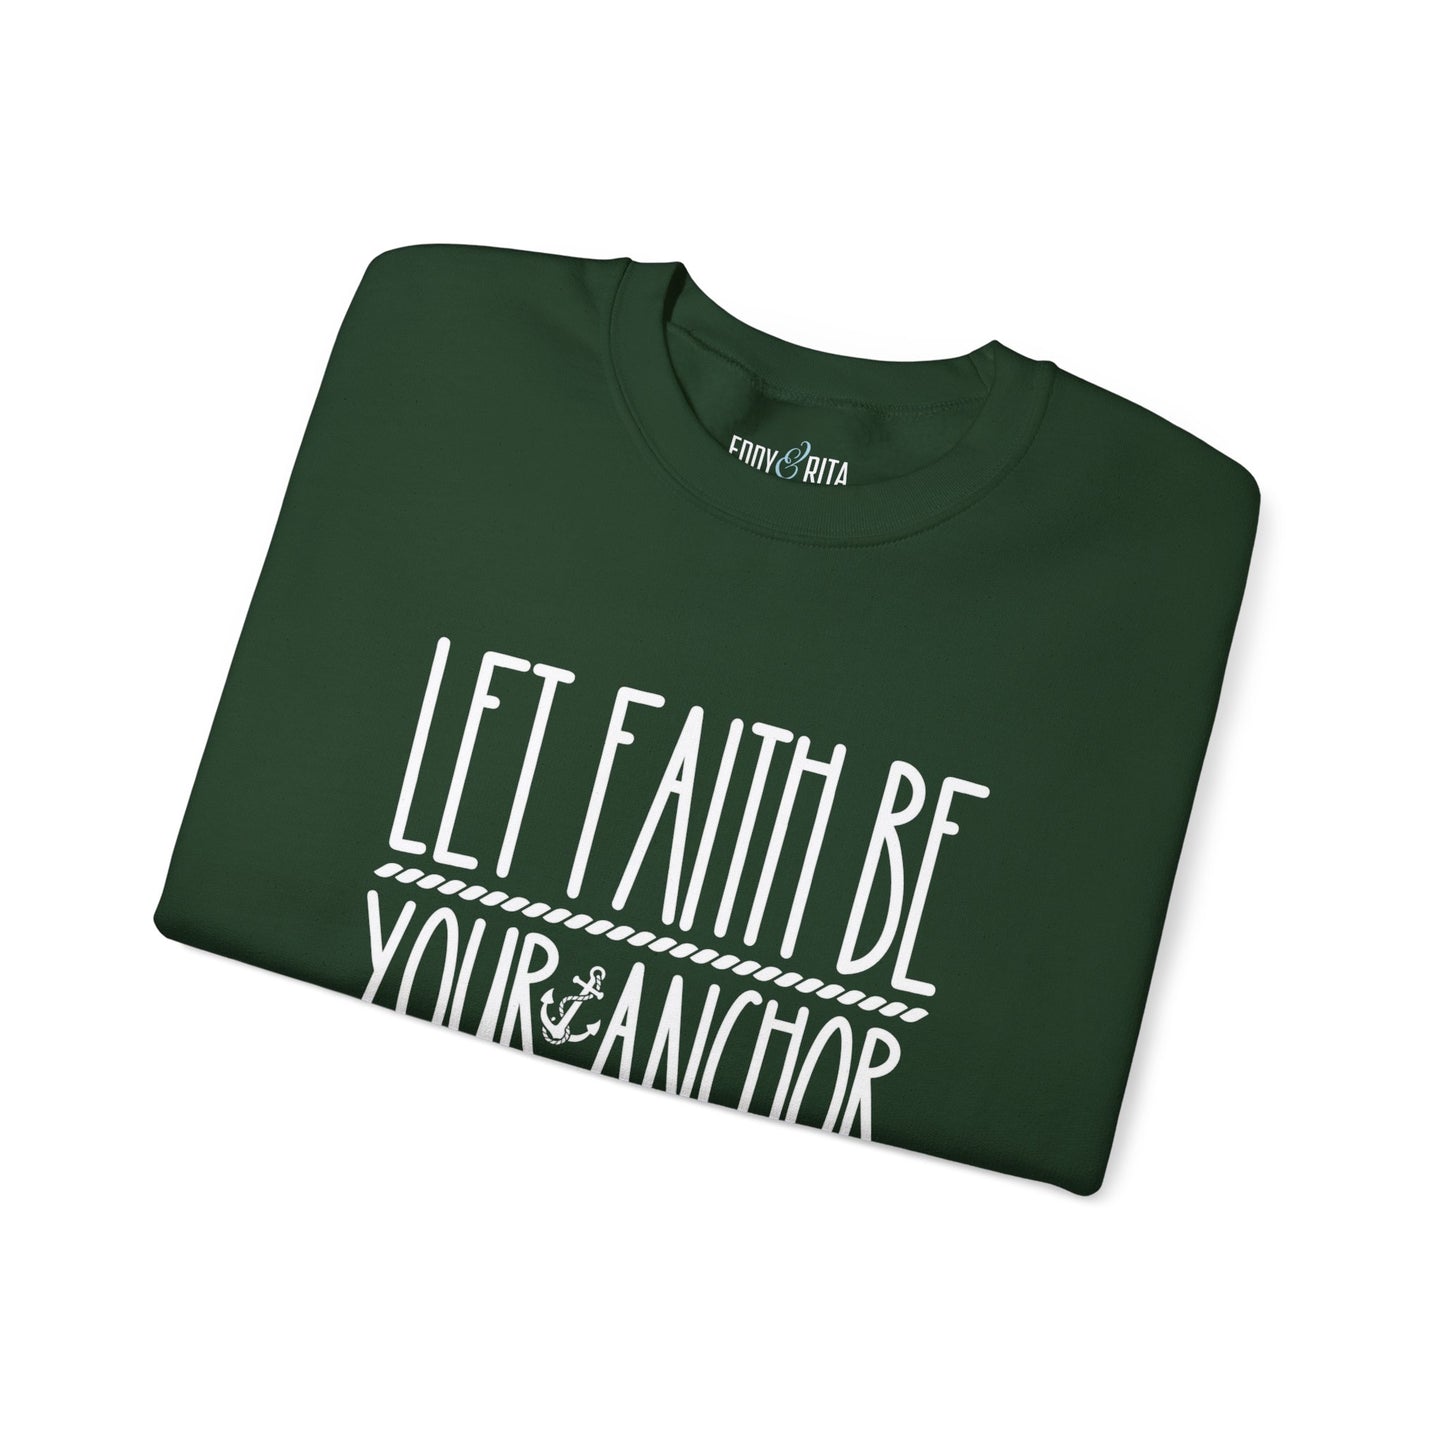 Let Faith Be: Women's Empowerment Sweatshirt for Inspirational Style - Eddy and Rita